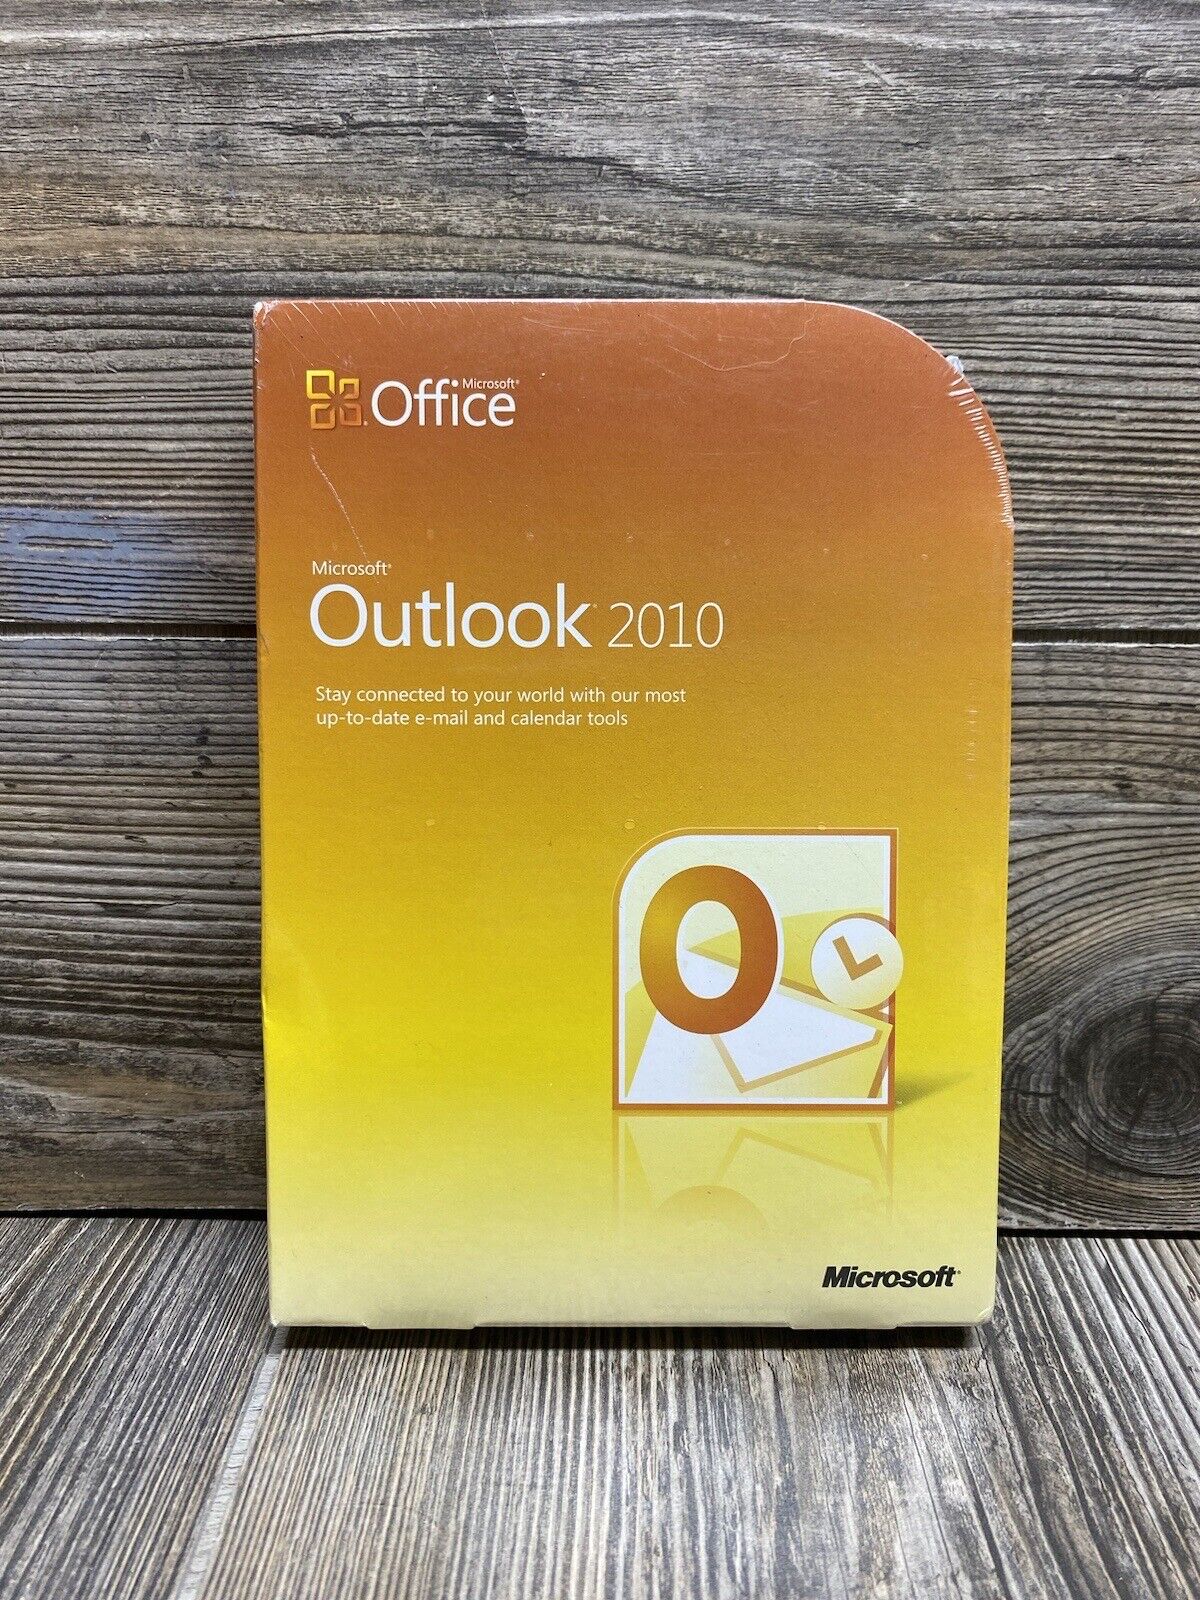 Boxed Microsoft Outlook 2010 for Windows - Old Version (543-05109)